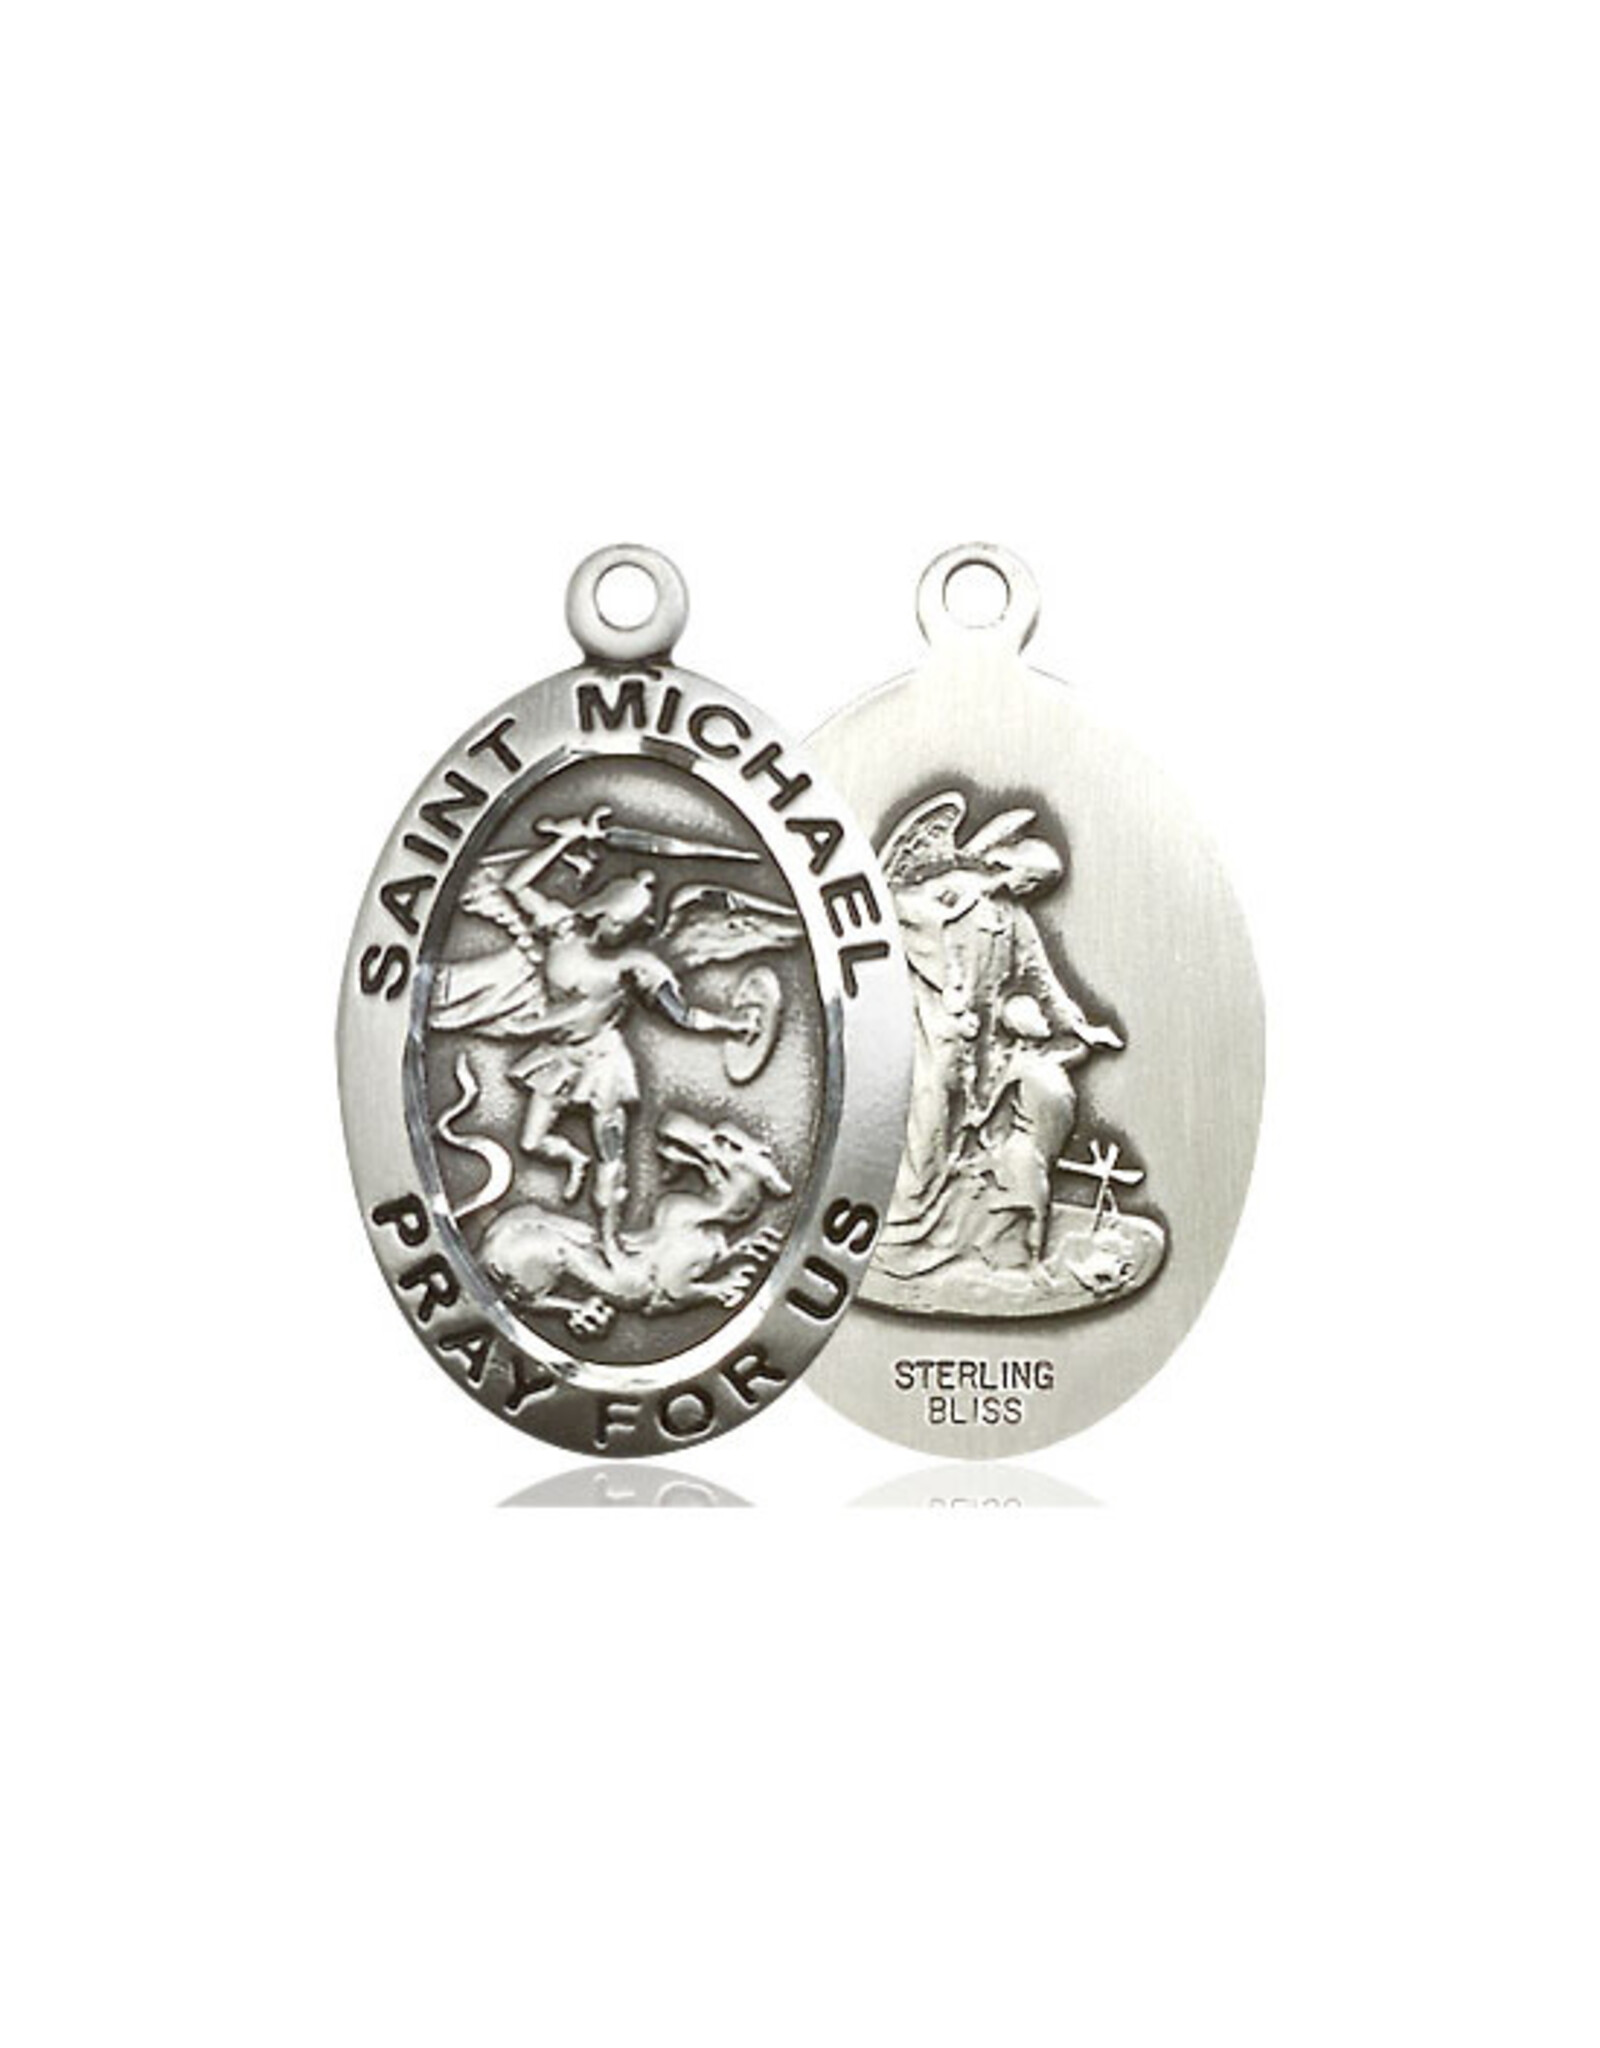 Bliss St. Michael the Archangel Medal - Sterling Silver (1")